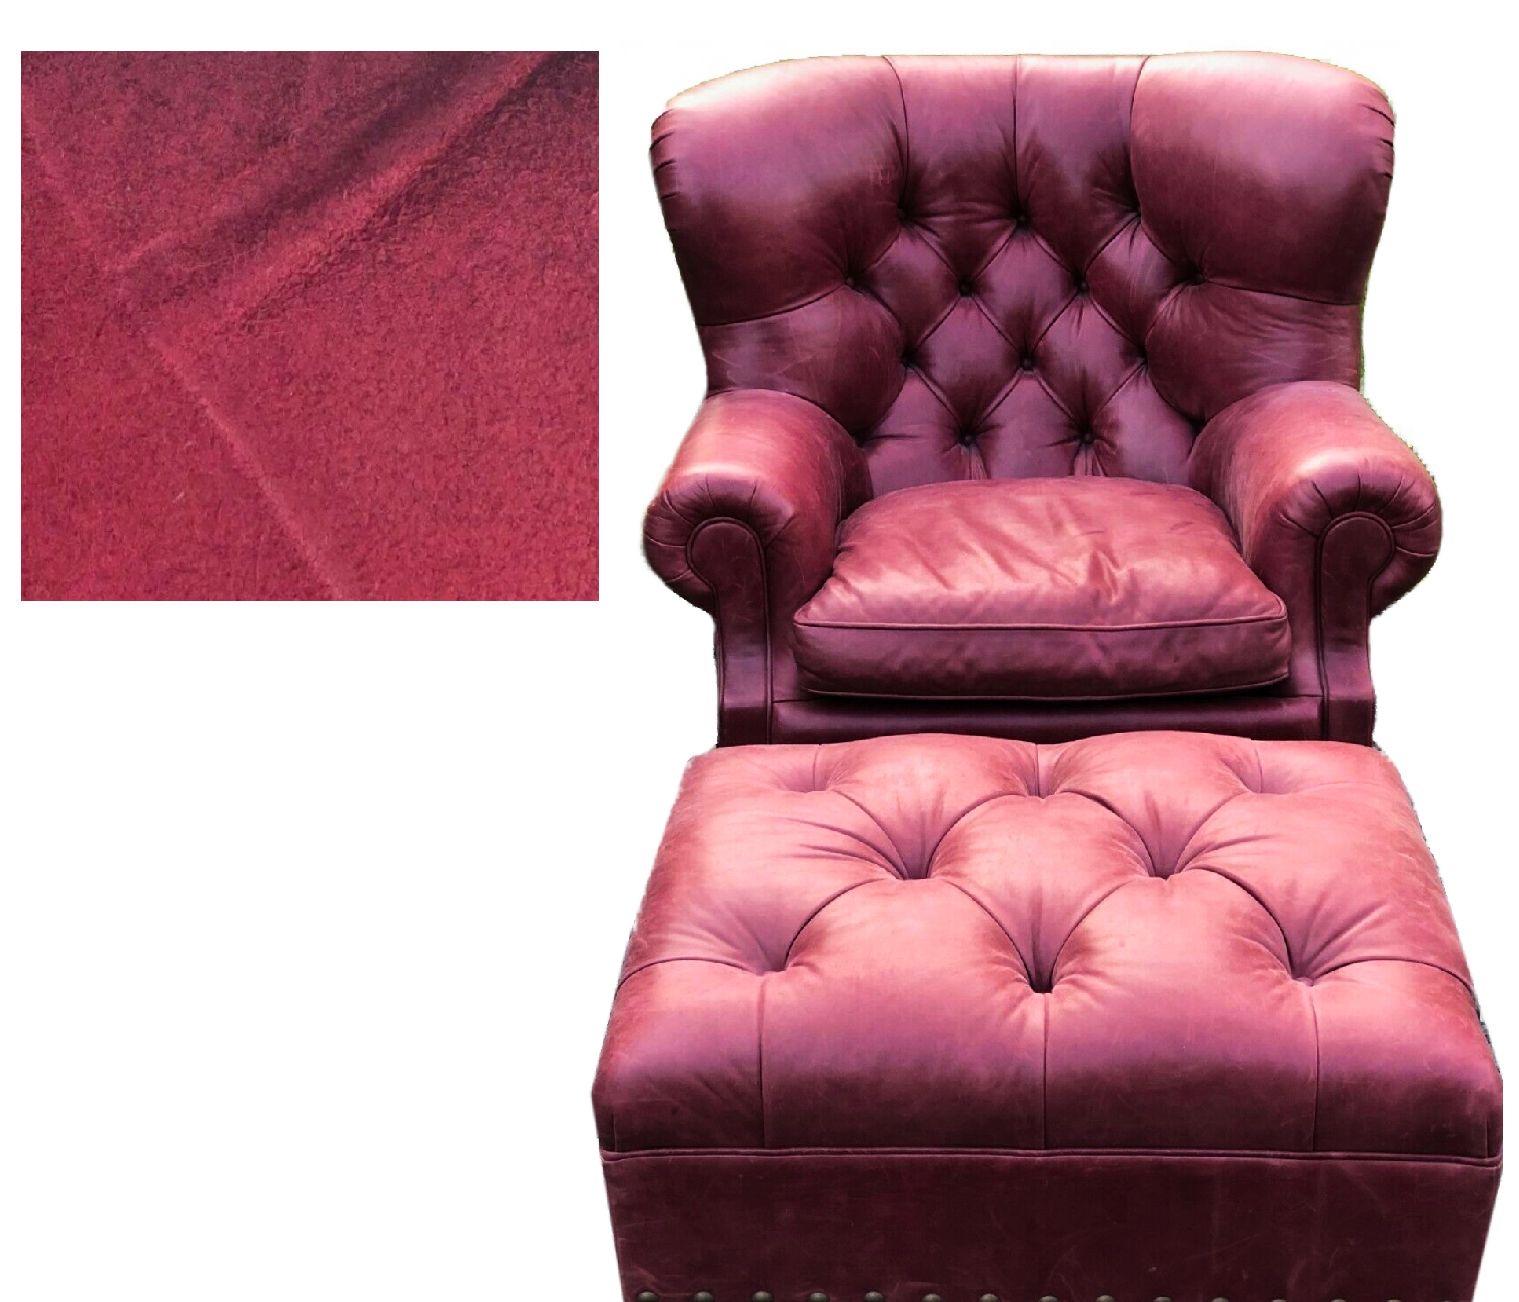 Vintage Ralph Lauren writer's red leather wingback armchair and ottoman set. This iconic Ralph Lauren winged club chair with bold nailhead trim has a Classic tufted back and bun feet. It is as much a Classic sculptural statement piece as it is a